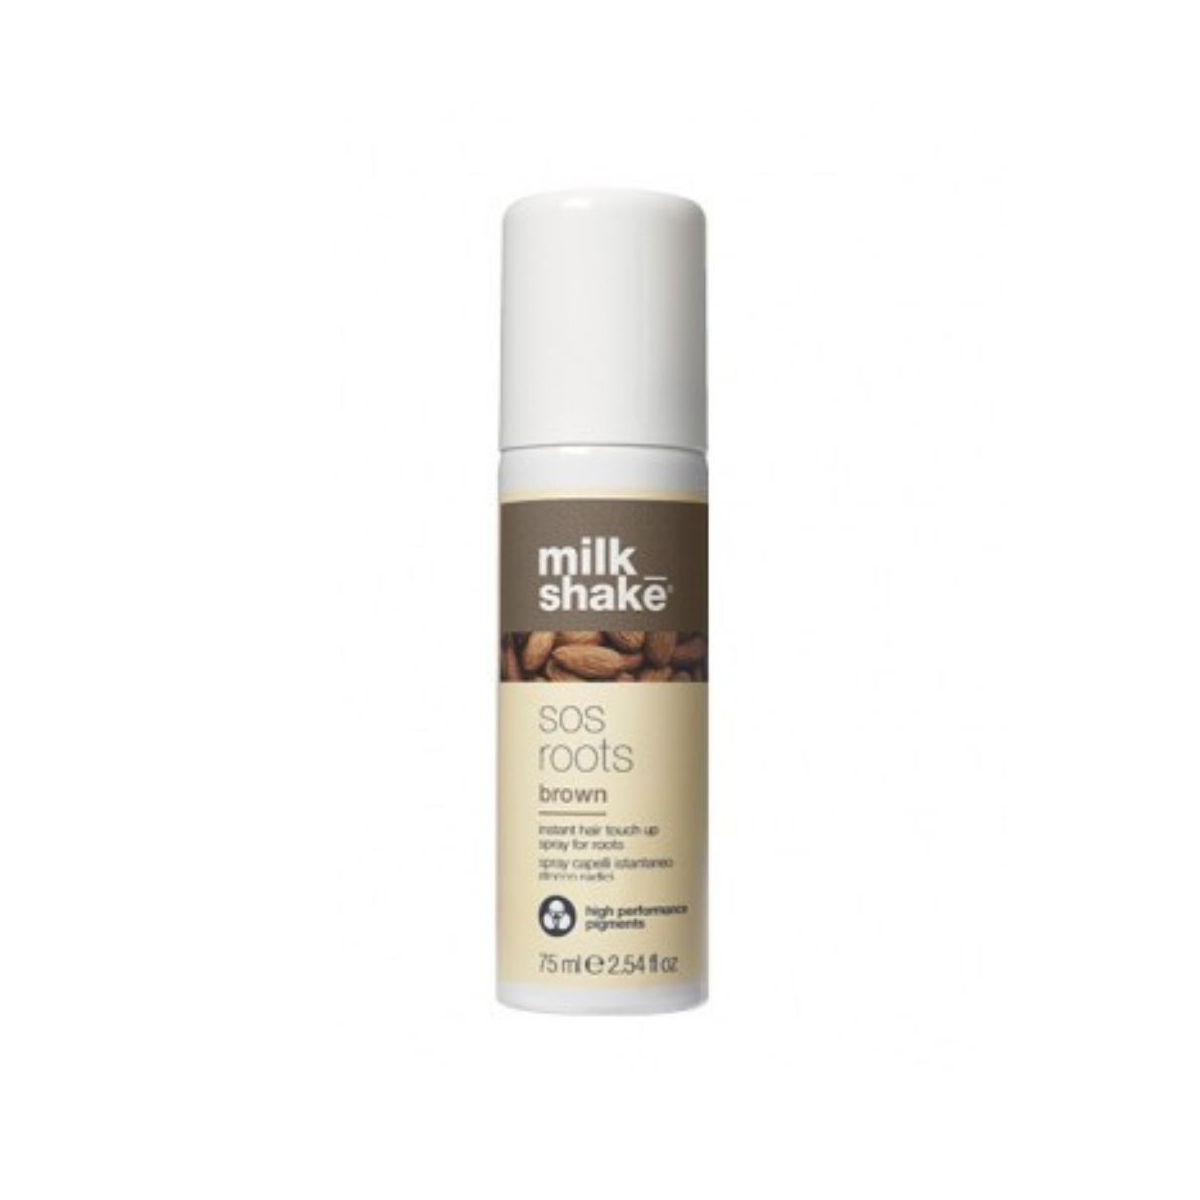 Z.ONE - MILK SHAKE - SOS ROOTS BROWN (75ml) Spray capelli istantaneo ritocco radici